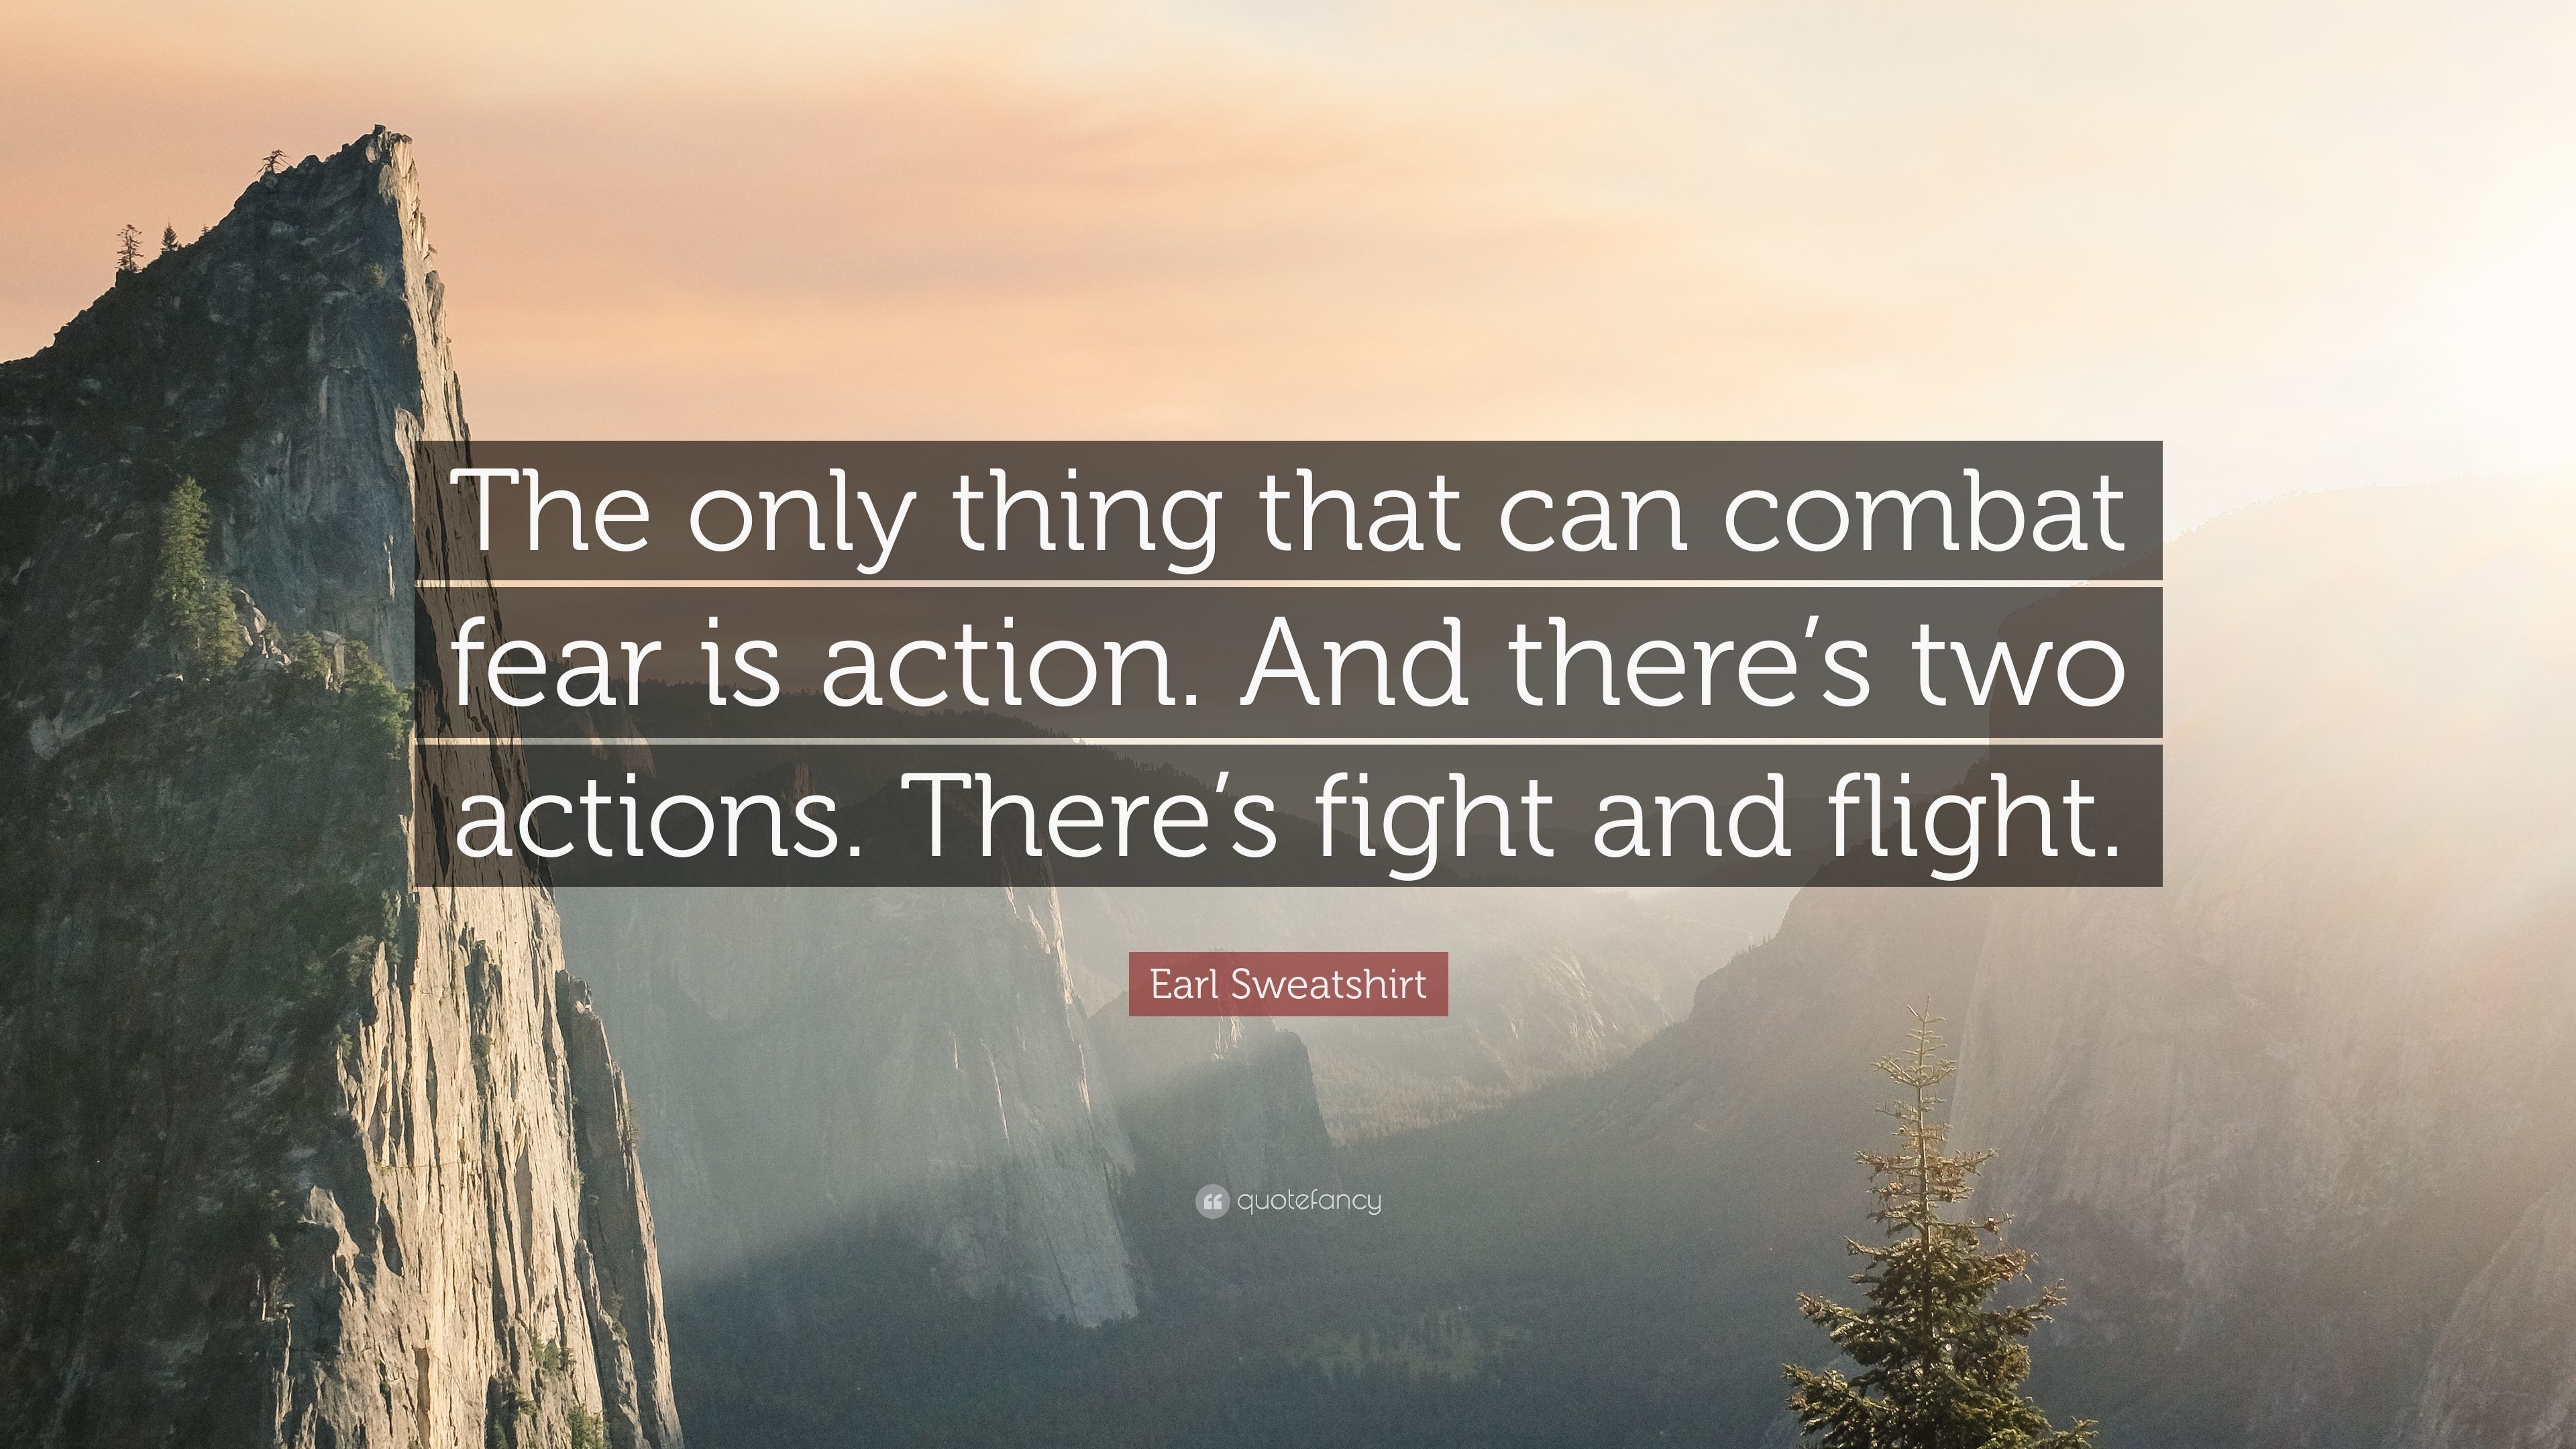 3840x2160 Earl Sweatshirt Quote: “The only thing that can combat fear is action. And